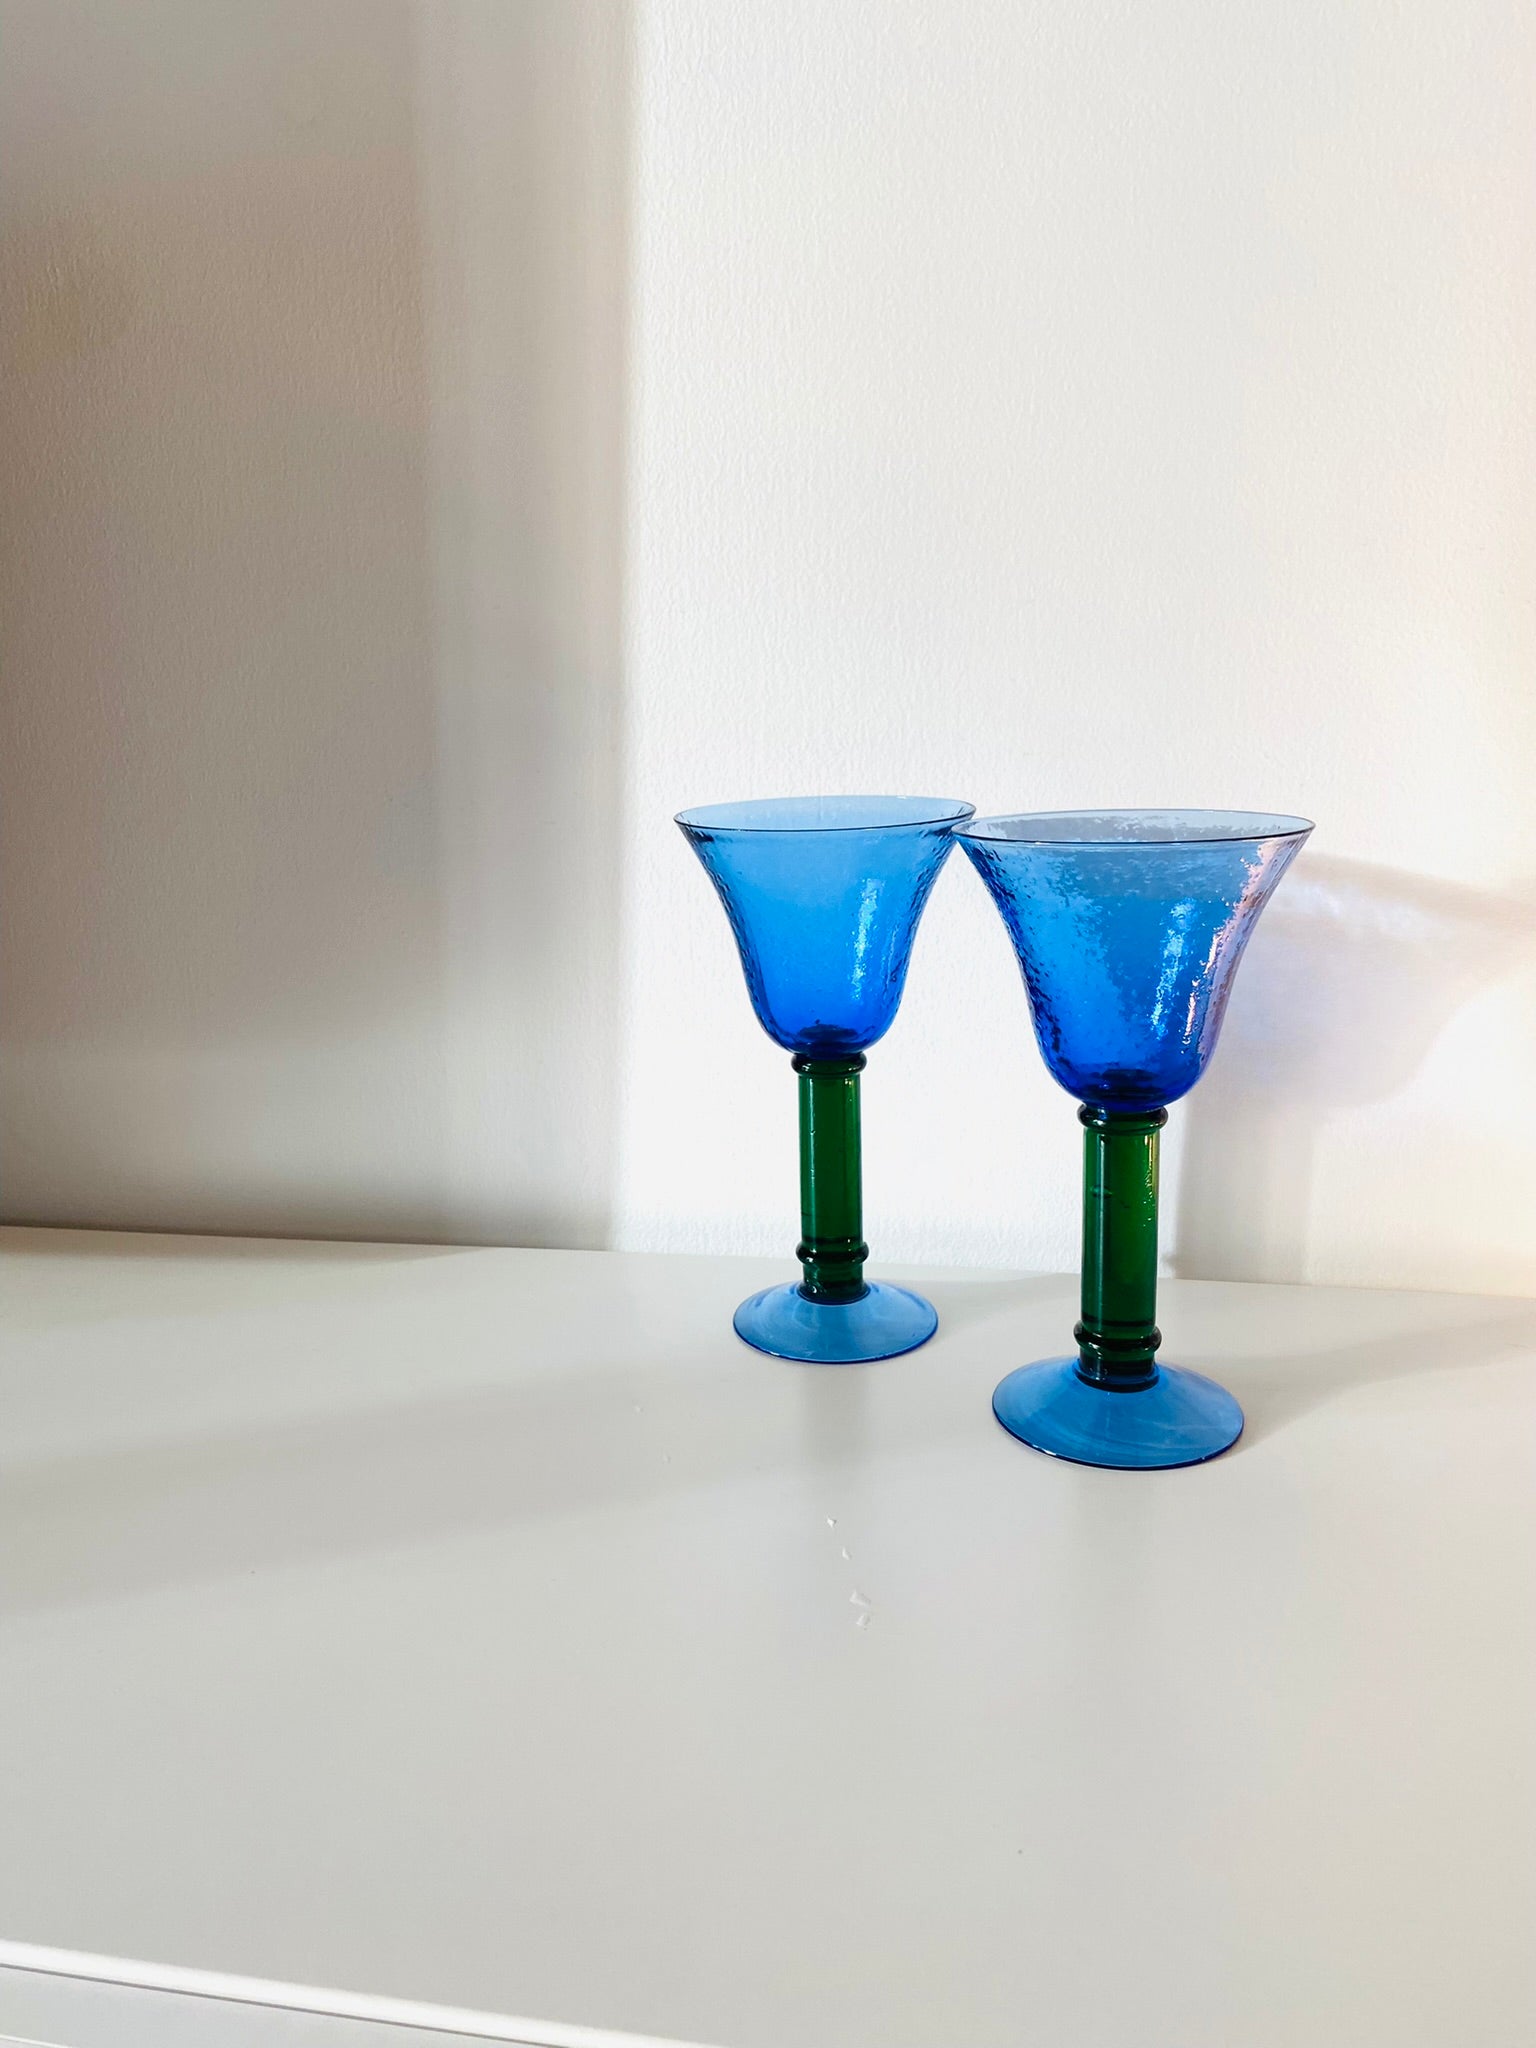 Set of 2 hand blown art glass drinking glasses blue with green stem